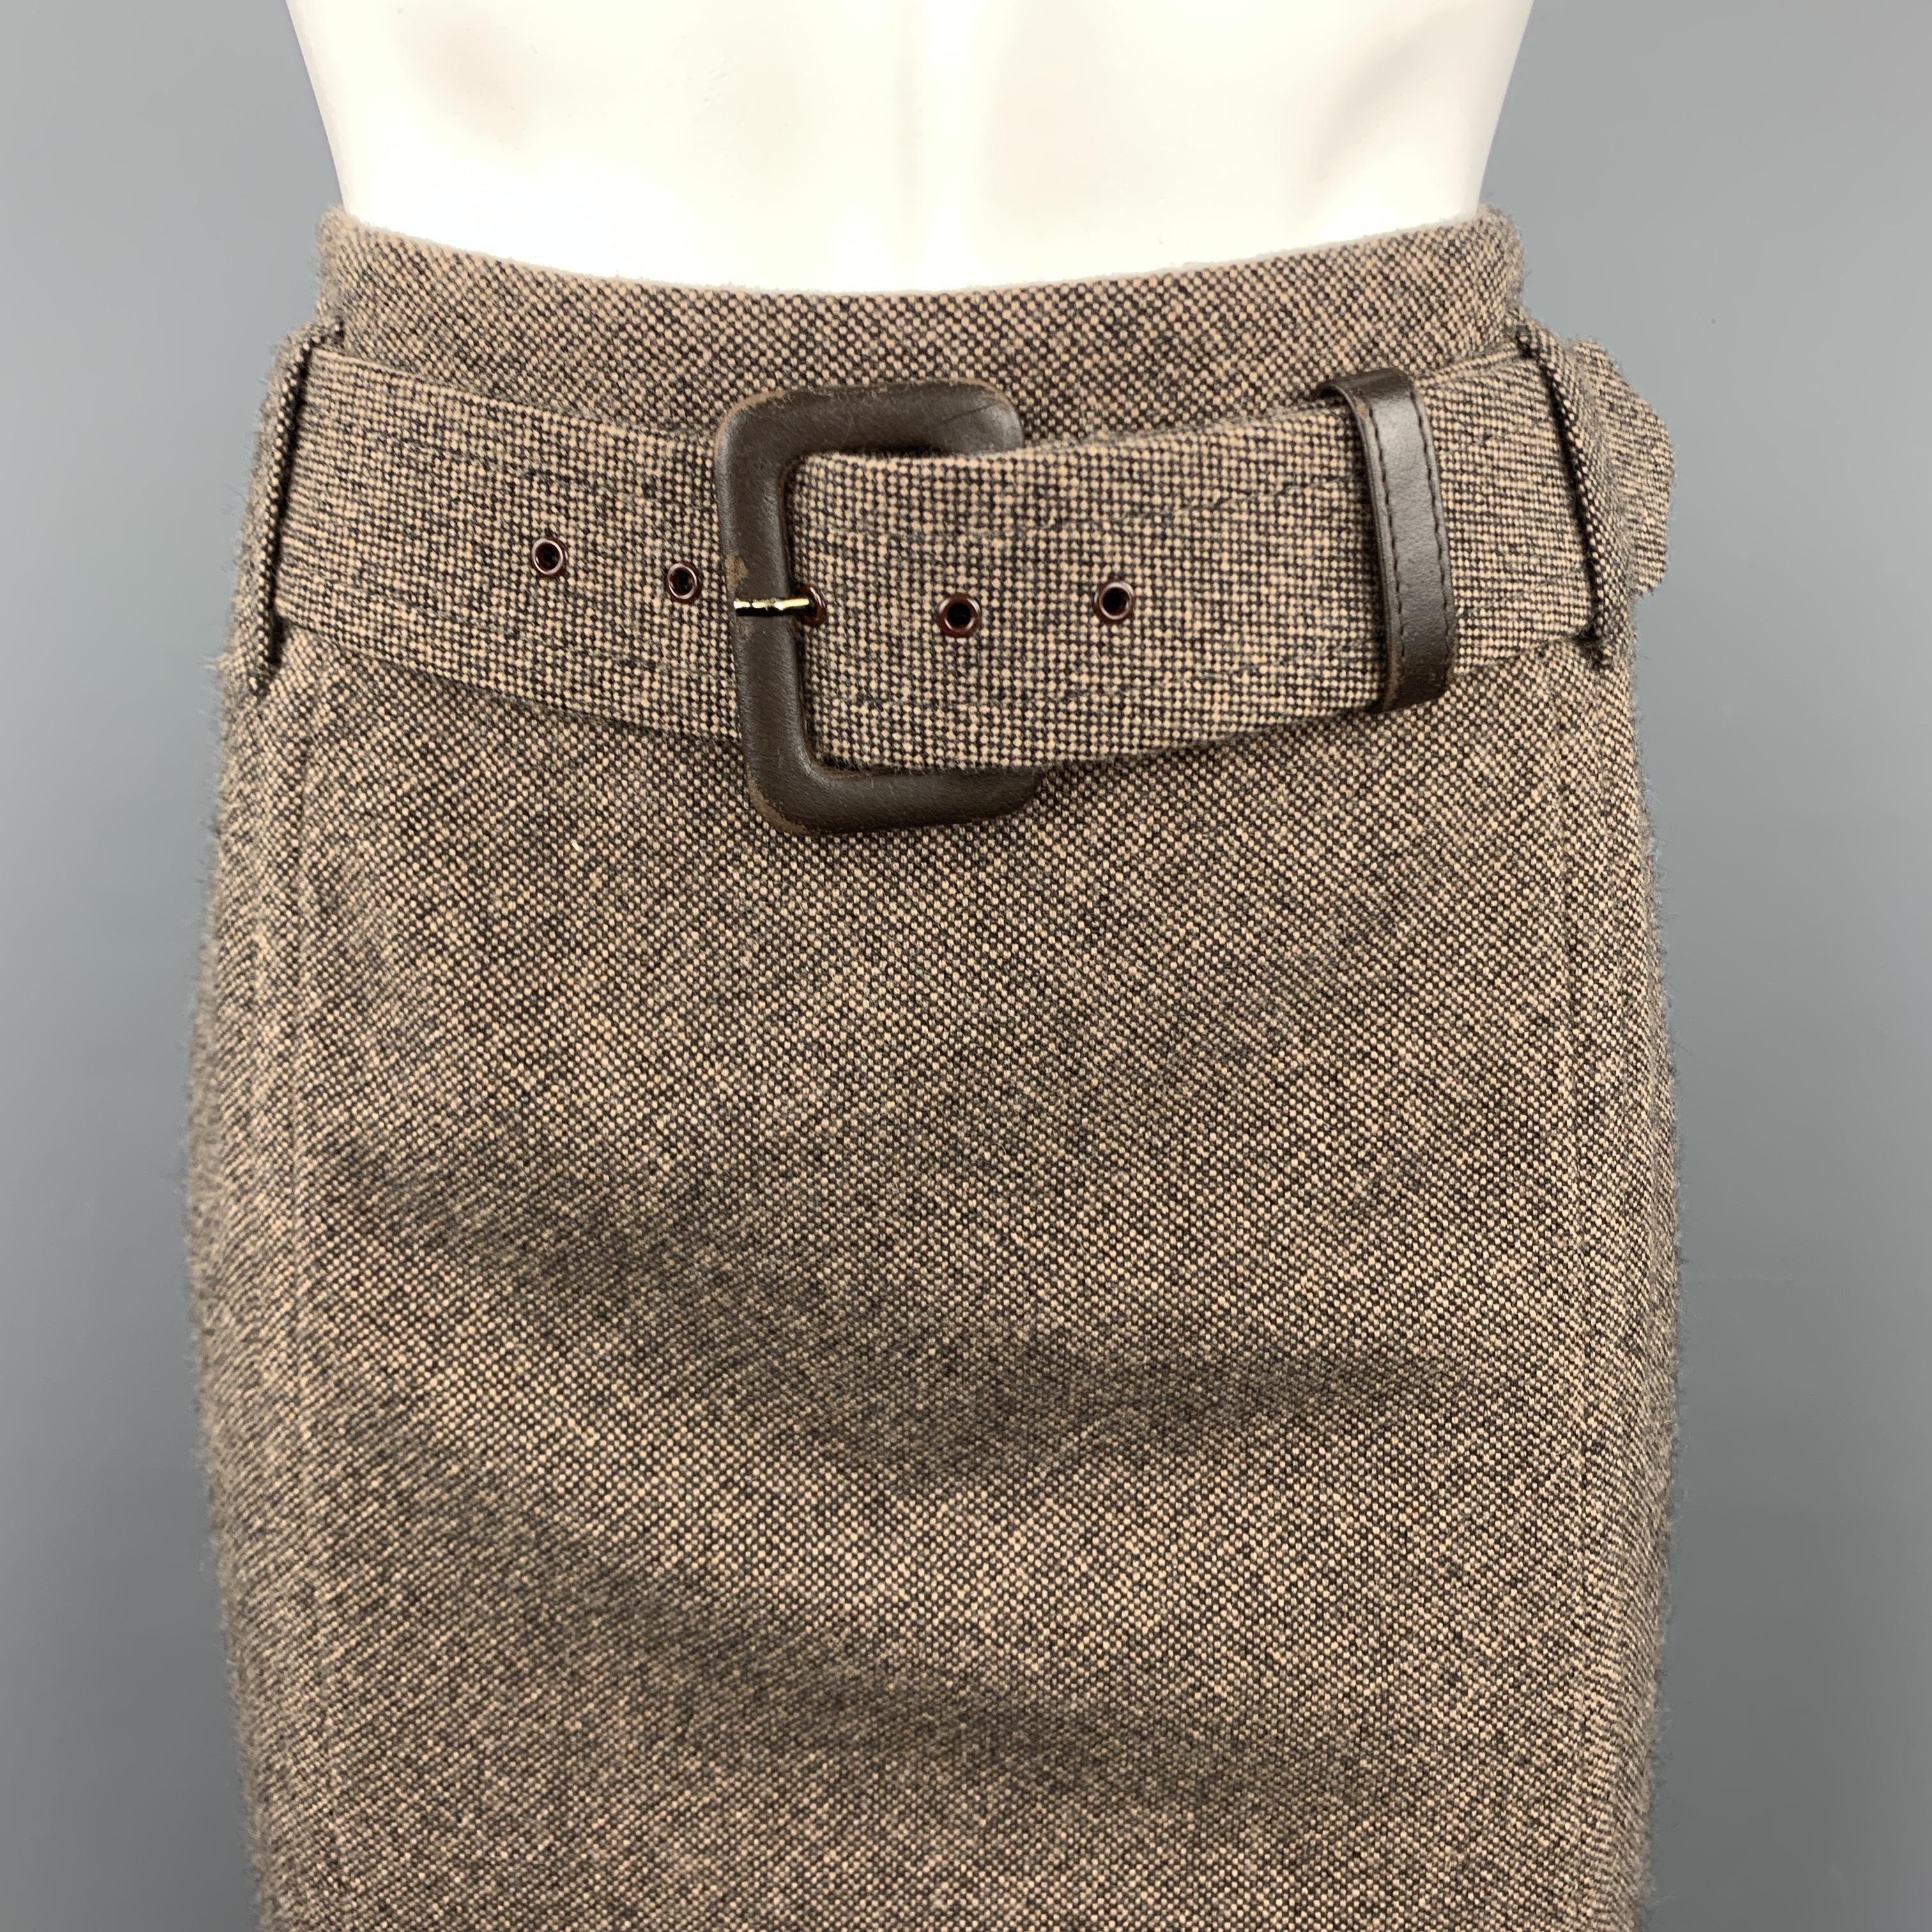 ESCADA skirt comes in brown and beige woven tweed with a matching fabric belt with brown leather buckle. Wear on buckle. As-is. 

Good Pre-Owned Condition.
Marked: IT 38

Measurements:

Waist: 30 in.
Hip: 40 in.
Length: 23 in.